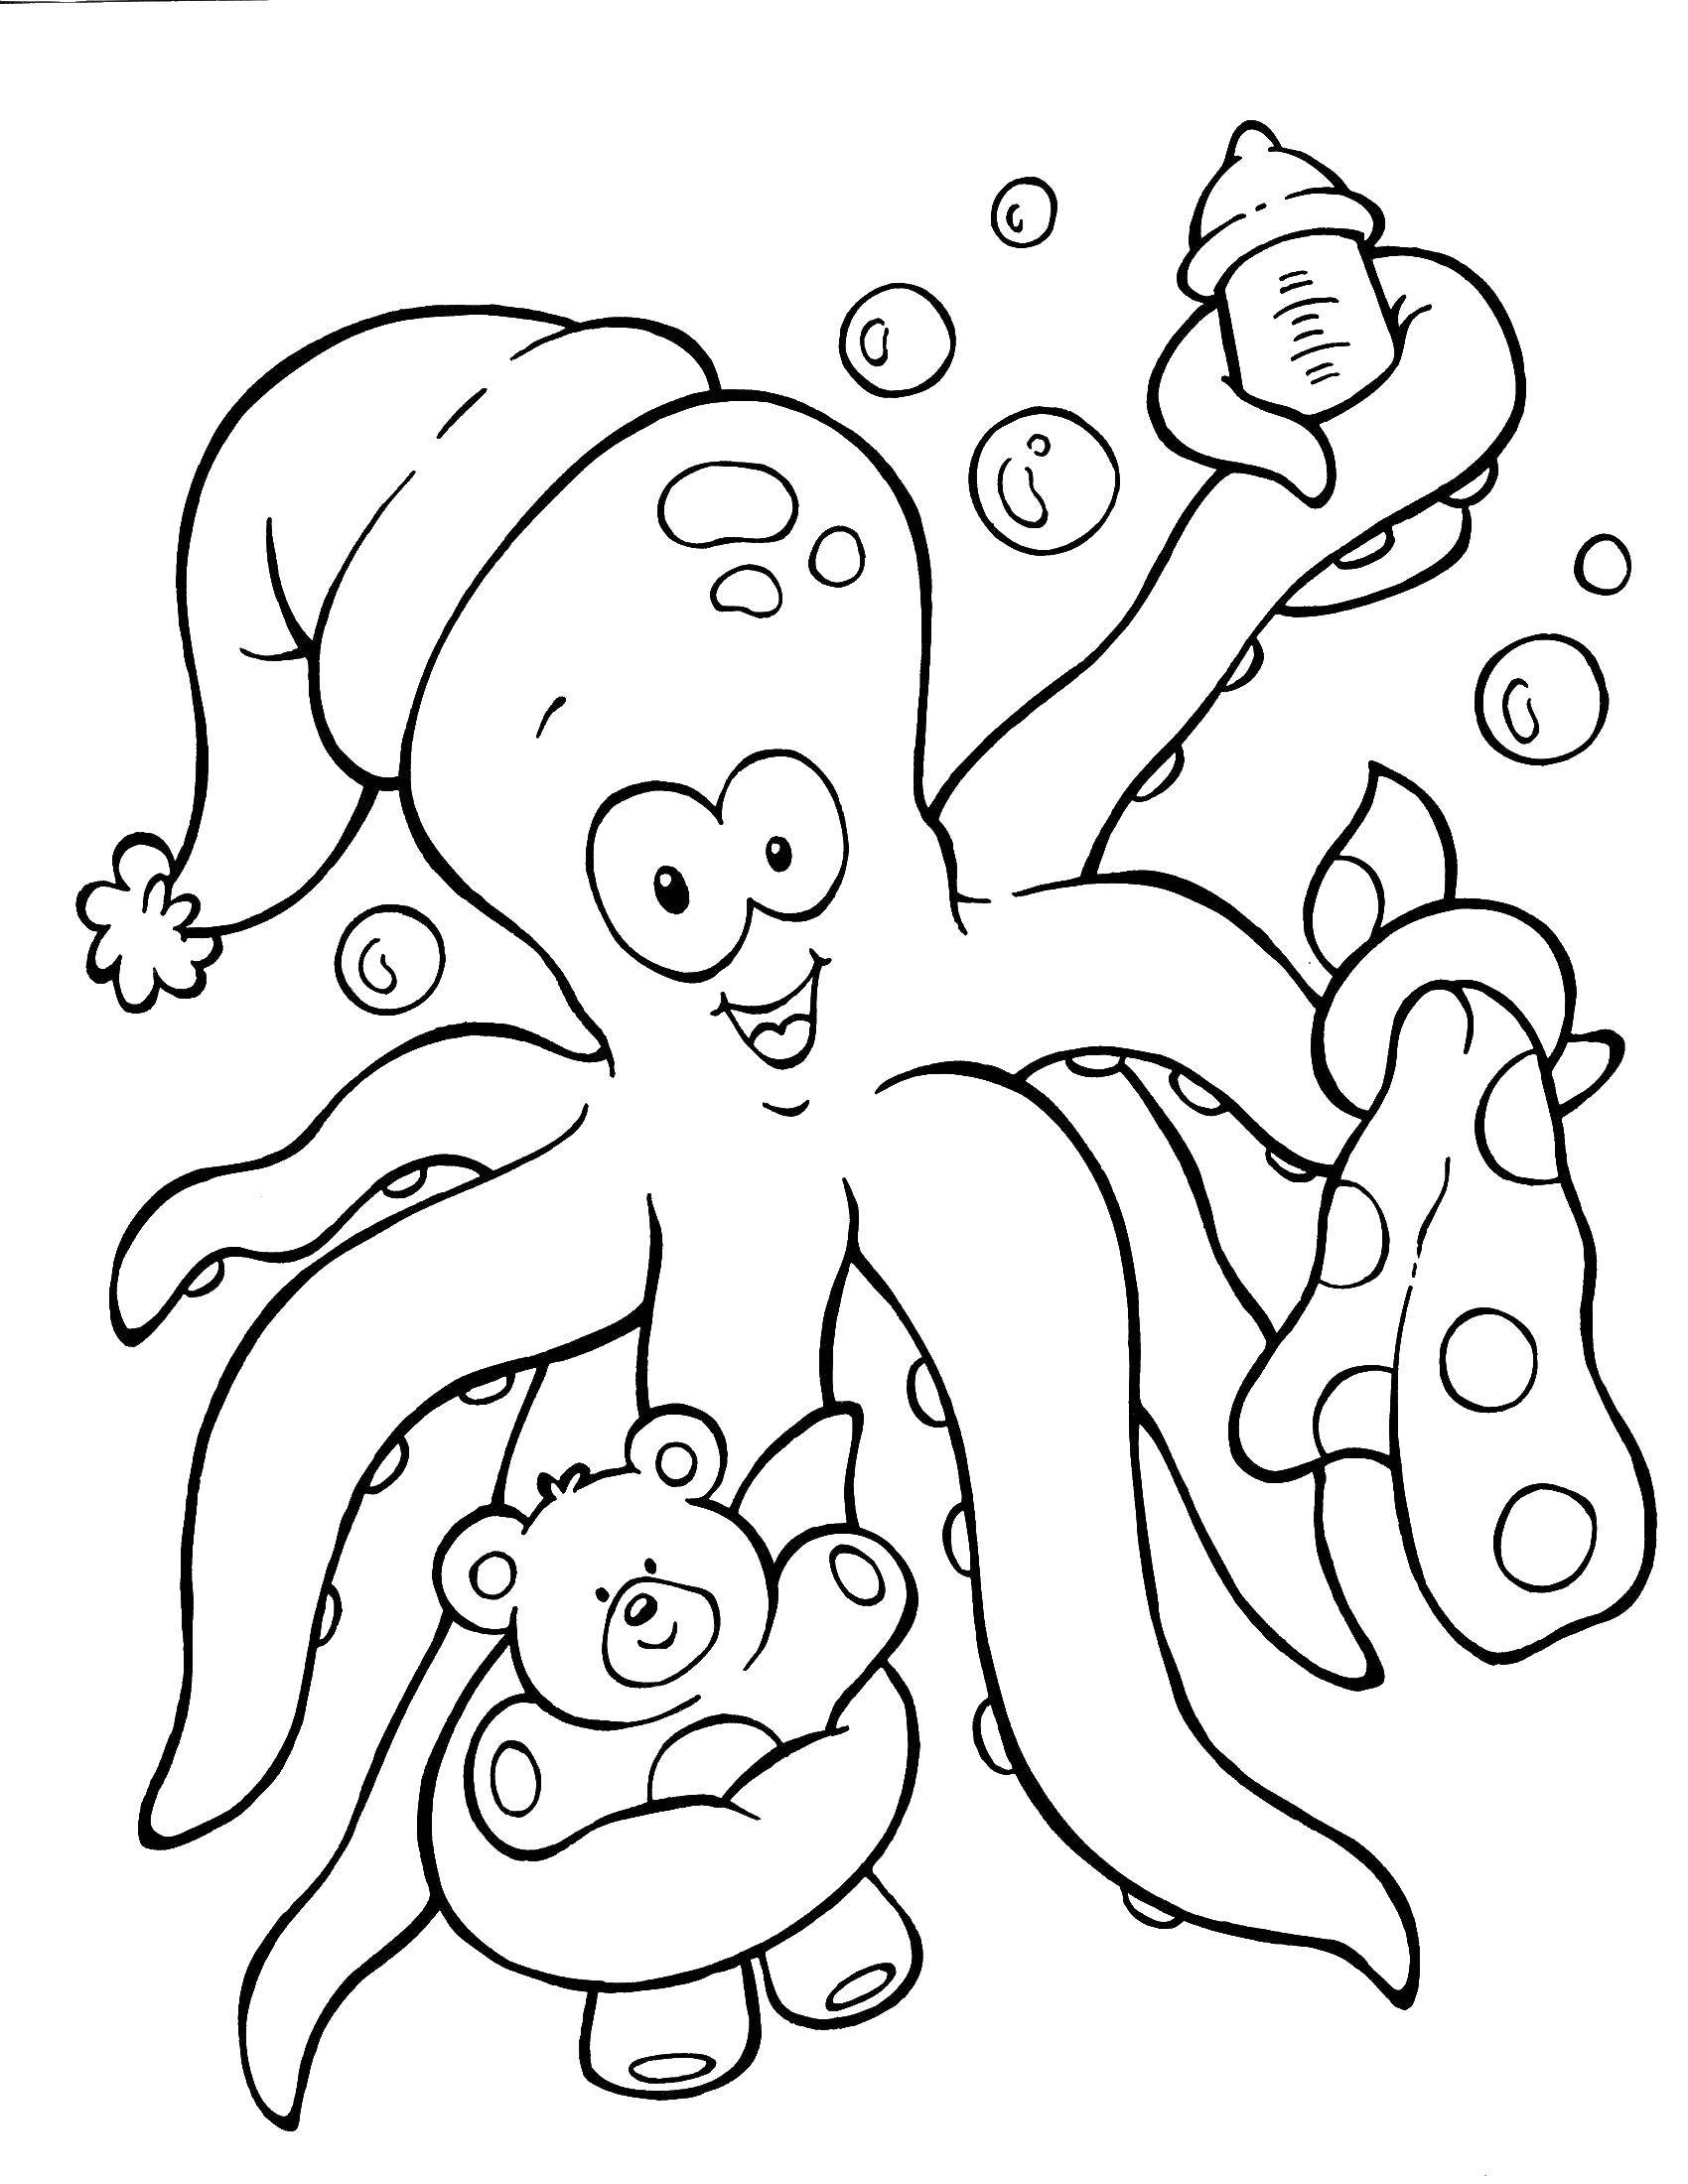 Coloring Octopus with a bear. Category marine. Tags:  Octopus, sea.